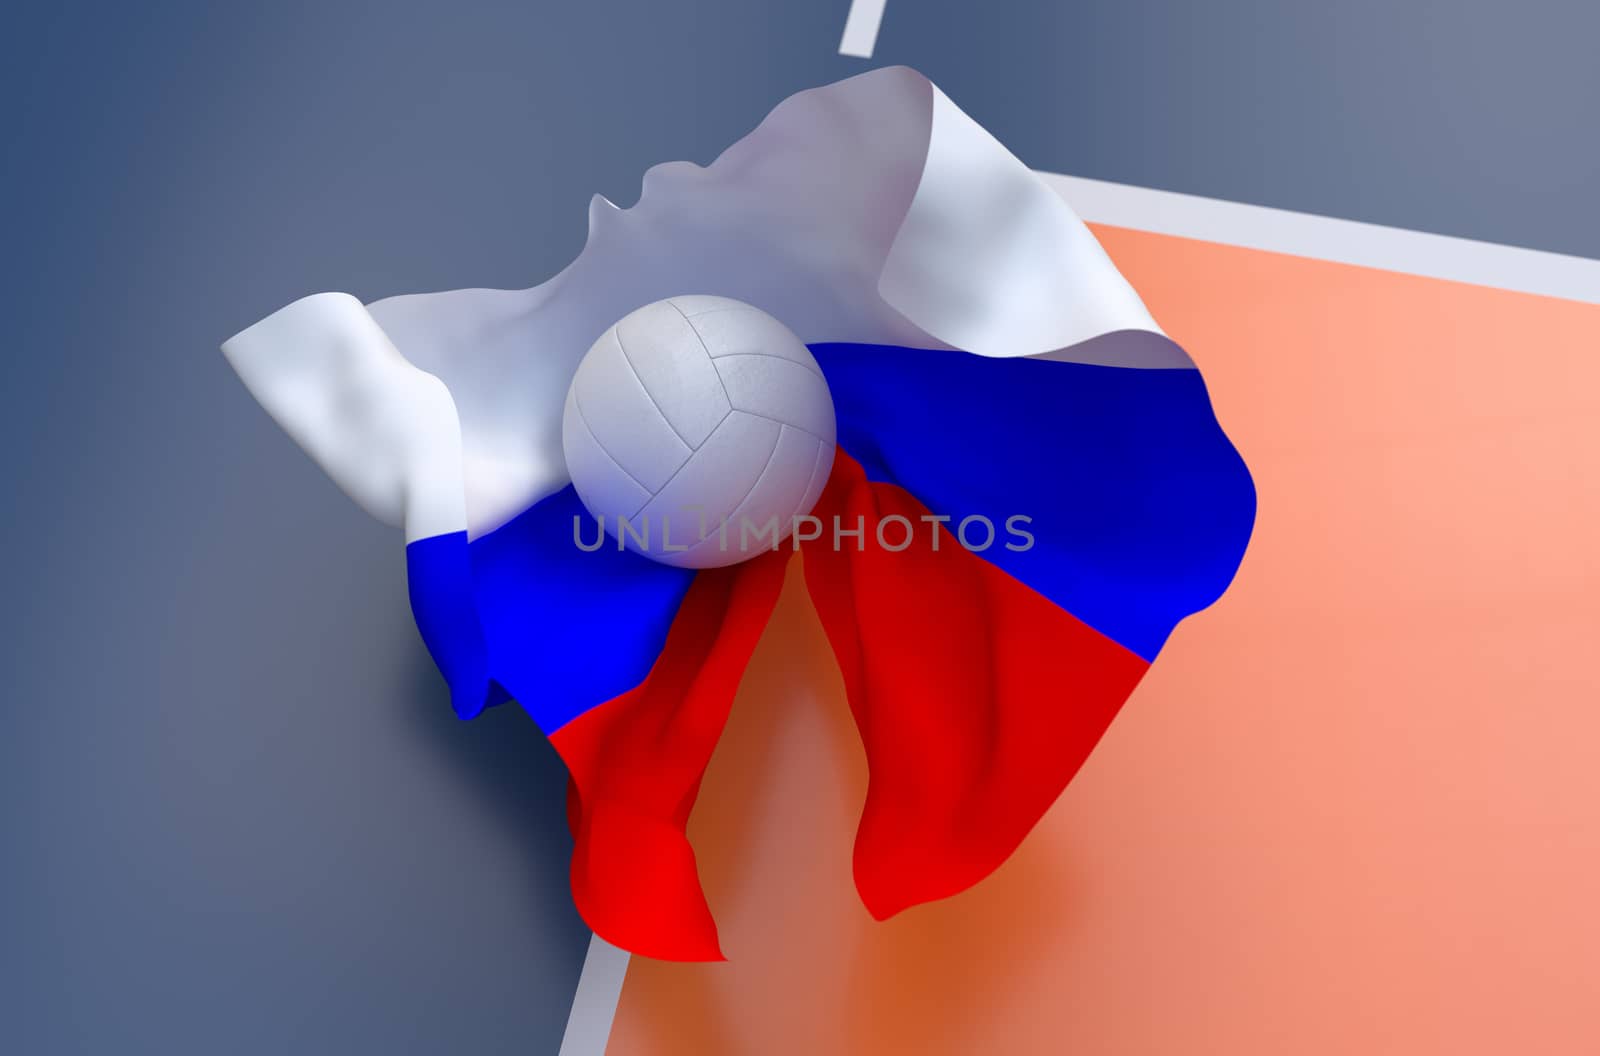 Flag of Russia with championship volleyball ball on volleyball court